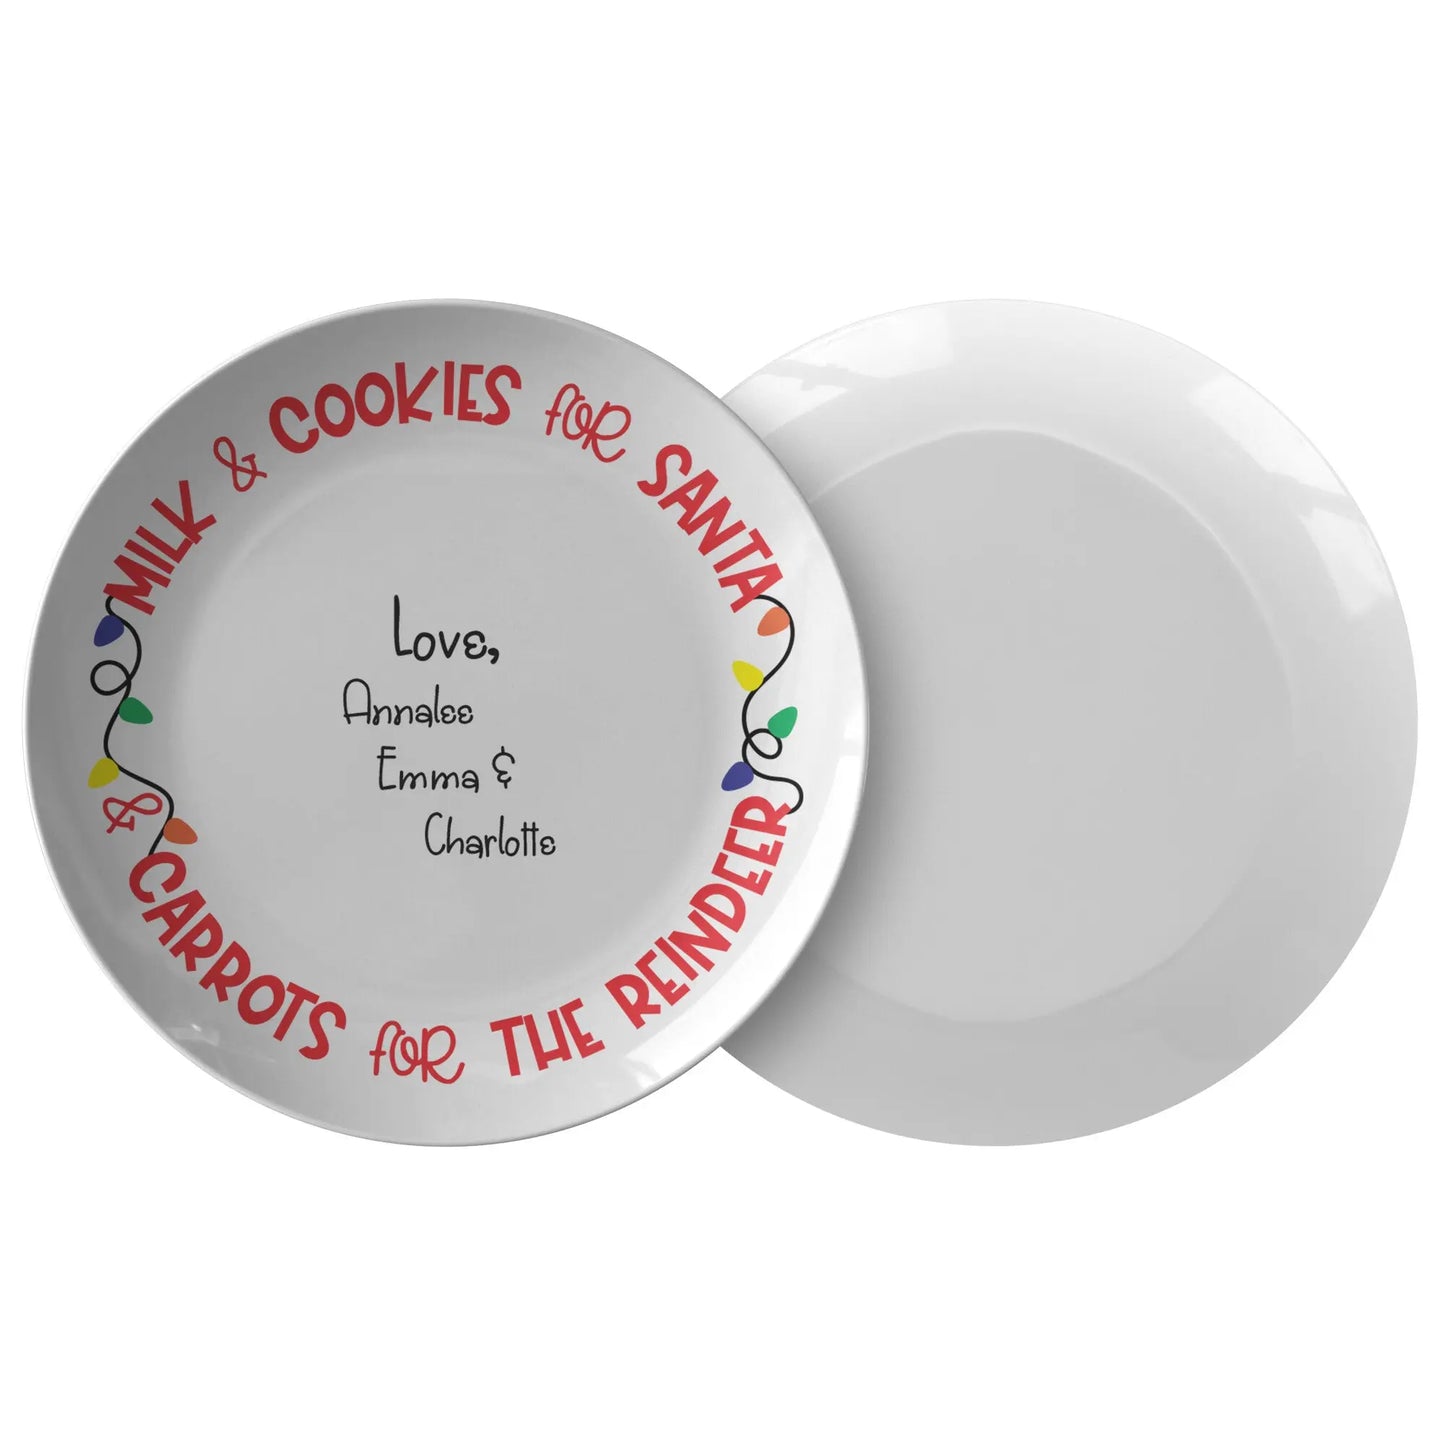 Cookies for Santa Plate - Personalized, Christmas Cookies Plate, Christmas Eve Plate teelaunch